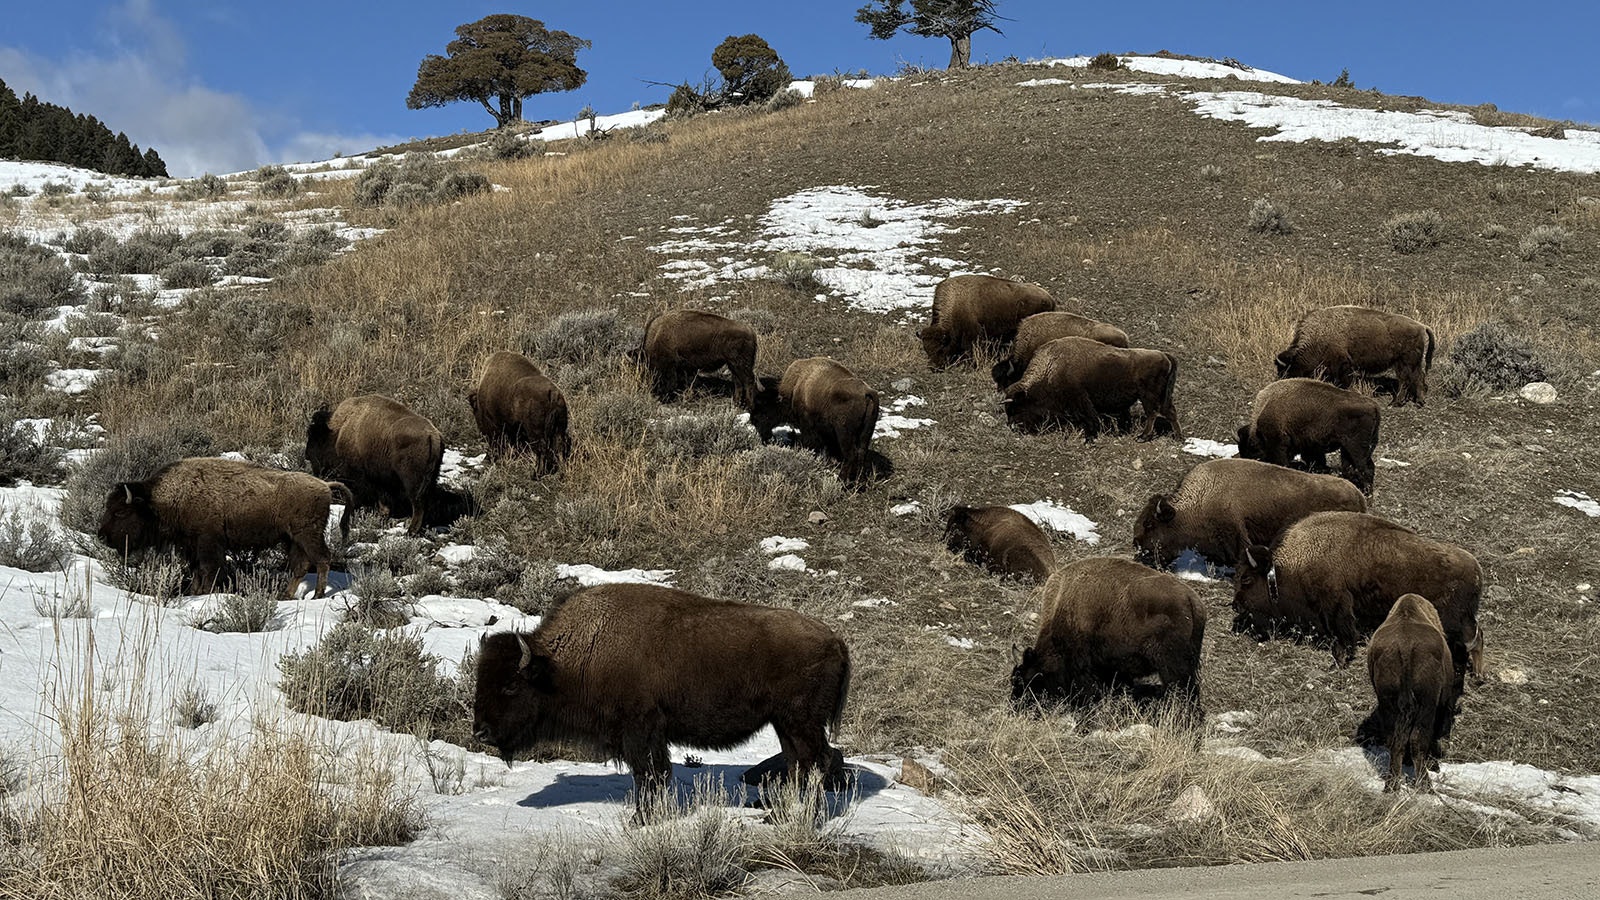 Bison roam the still snowy hills near Mammoth Hot Springs in Yellowstone National Park.